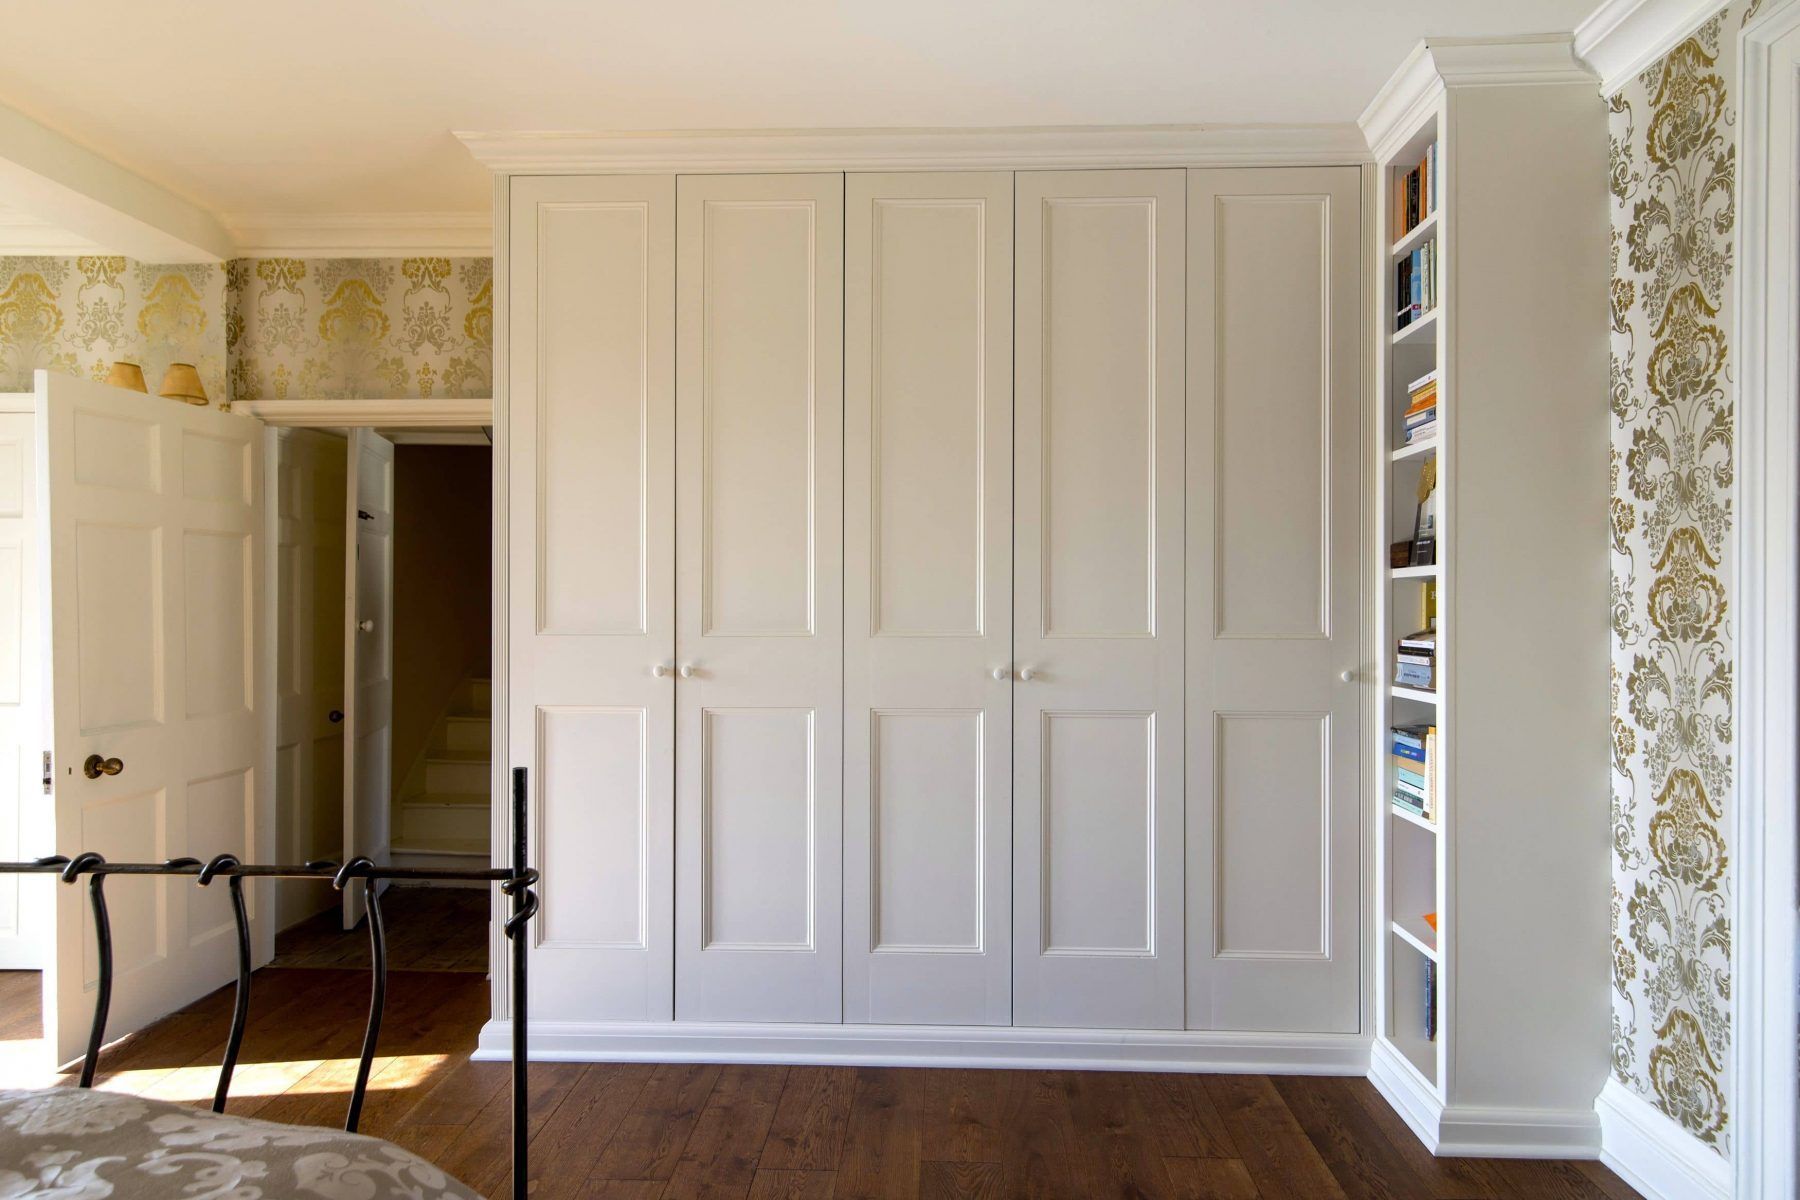 Image Result For Building Fitted Wardrobes Traditional Doors | Fitted  Wardrobes, Bespoke Wardrobe, Built In Wardrobe With Regard To Traditional Wardrobes (View 3 of 15)